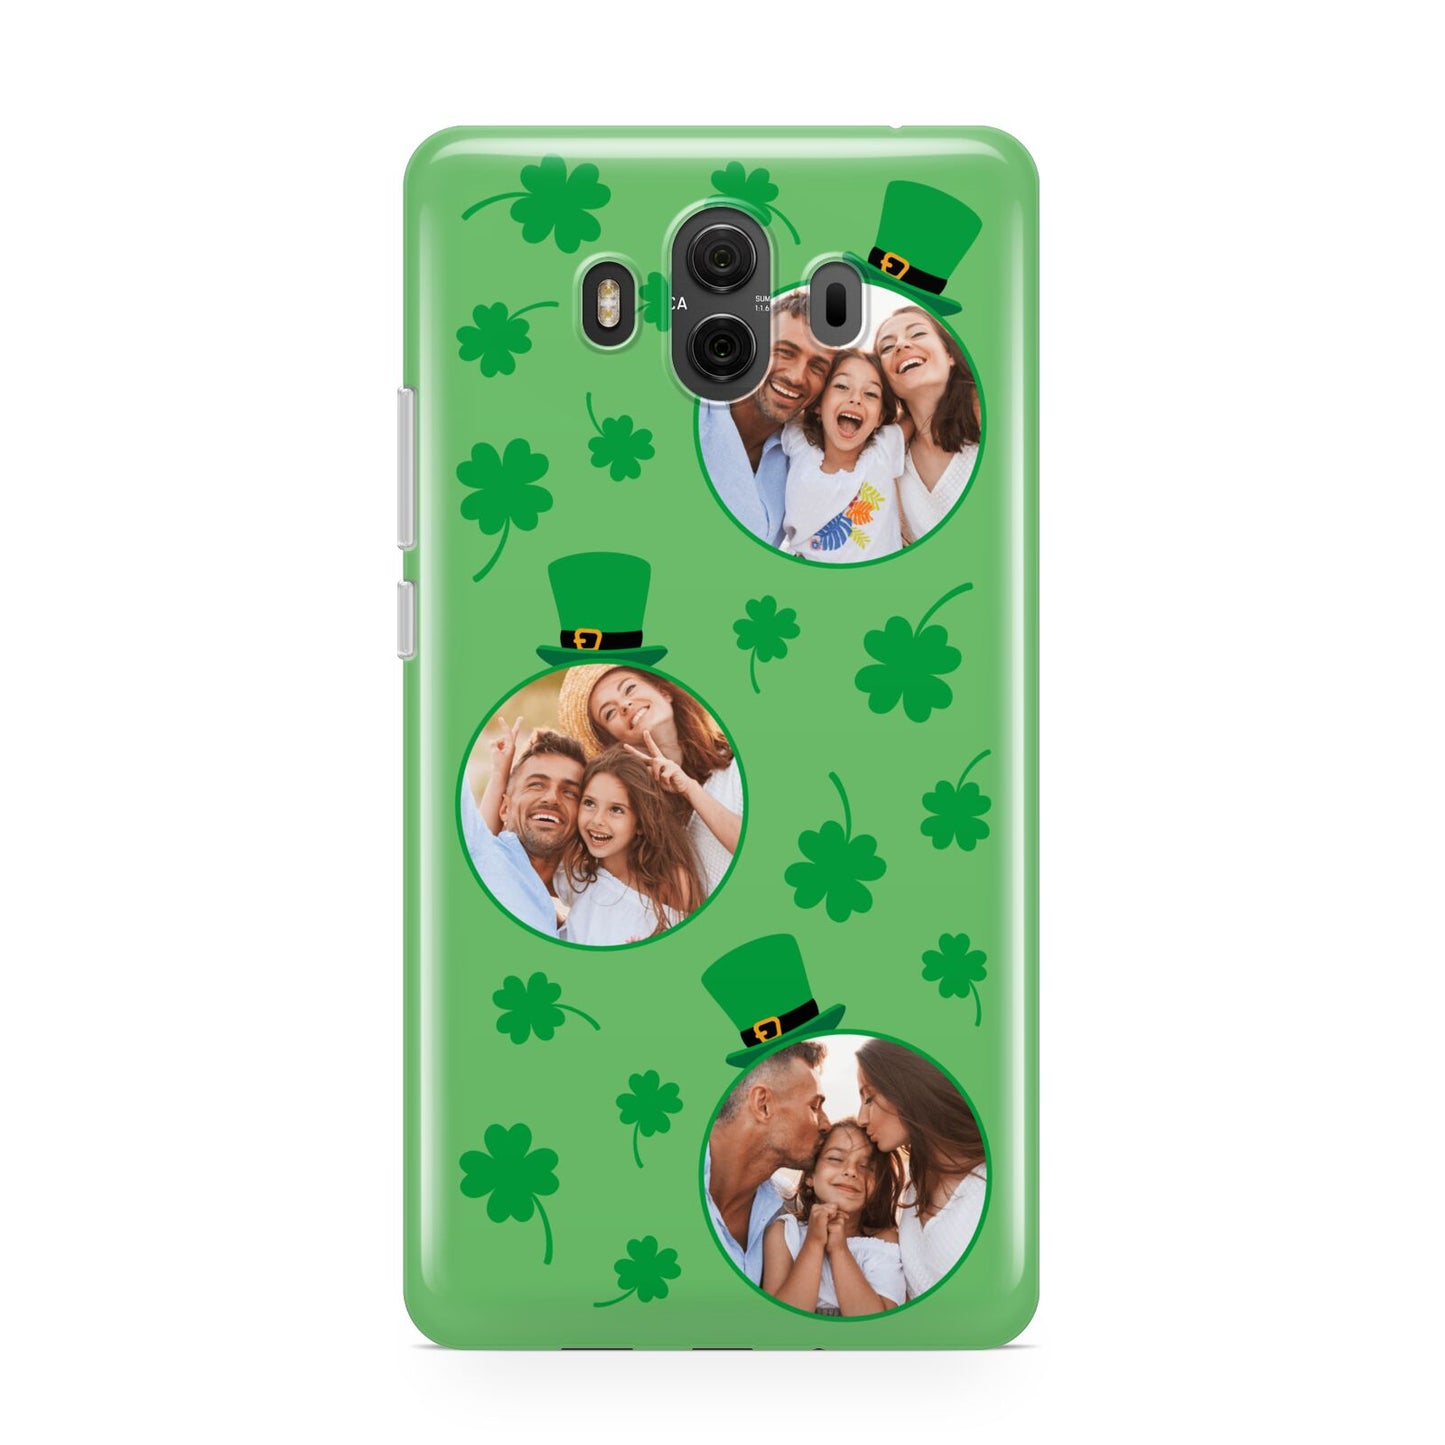 St Patricks Day Personalised Photo Huawei Mate 10 Protective Phone Case